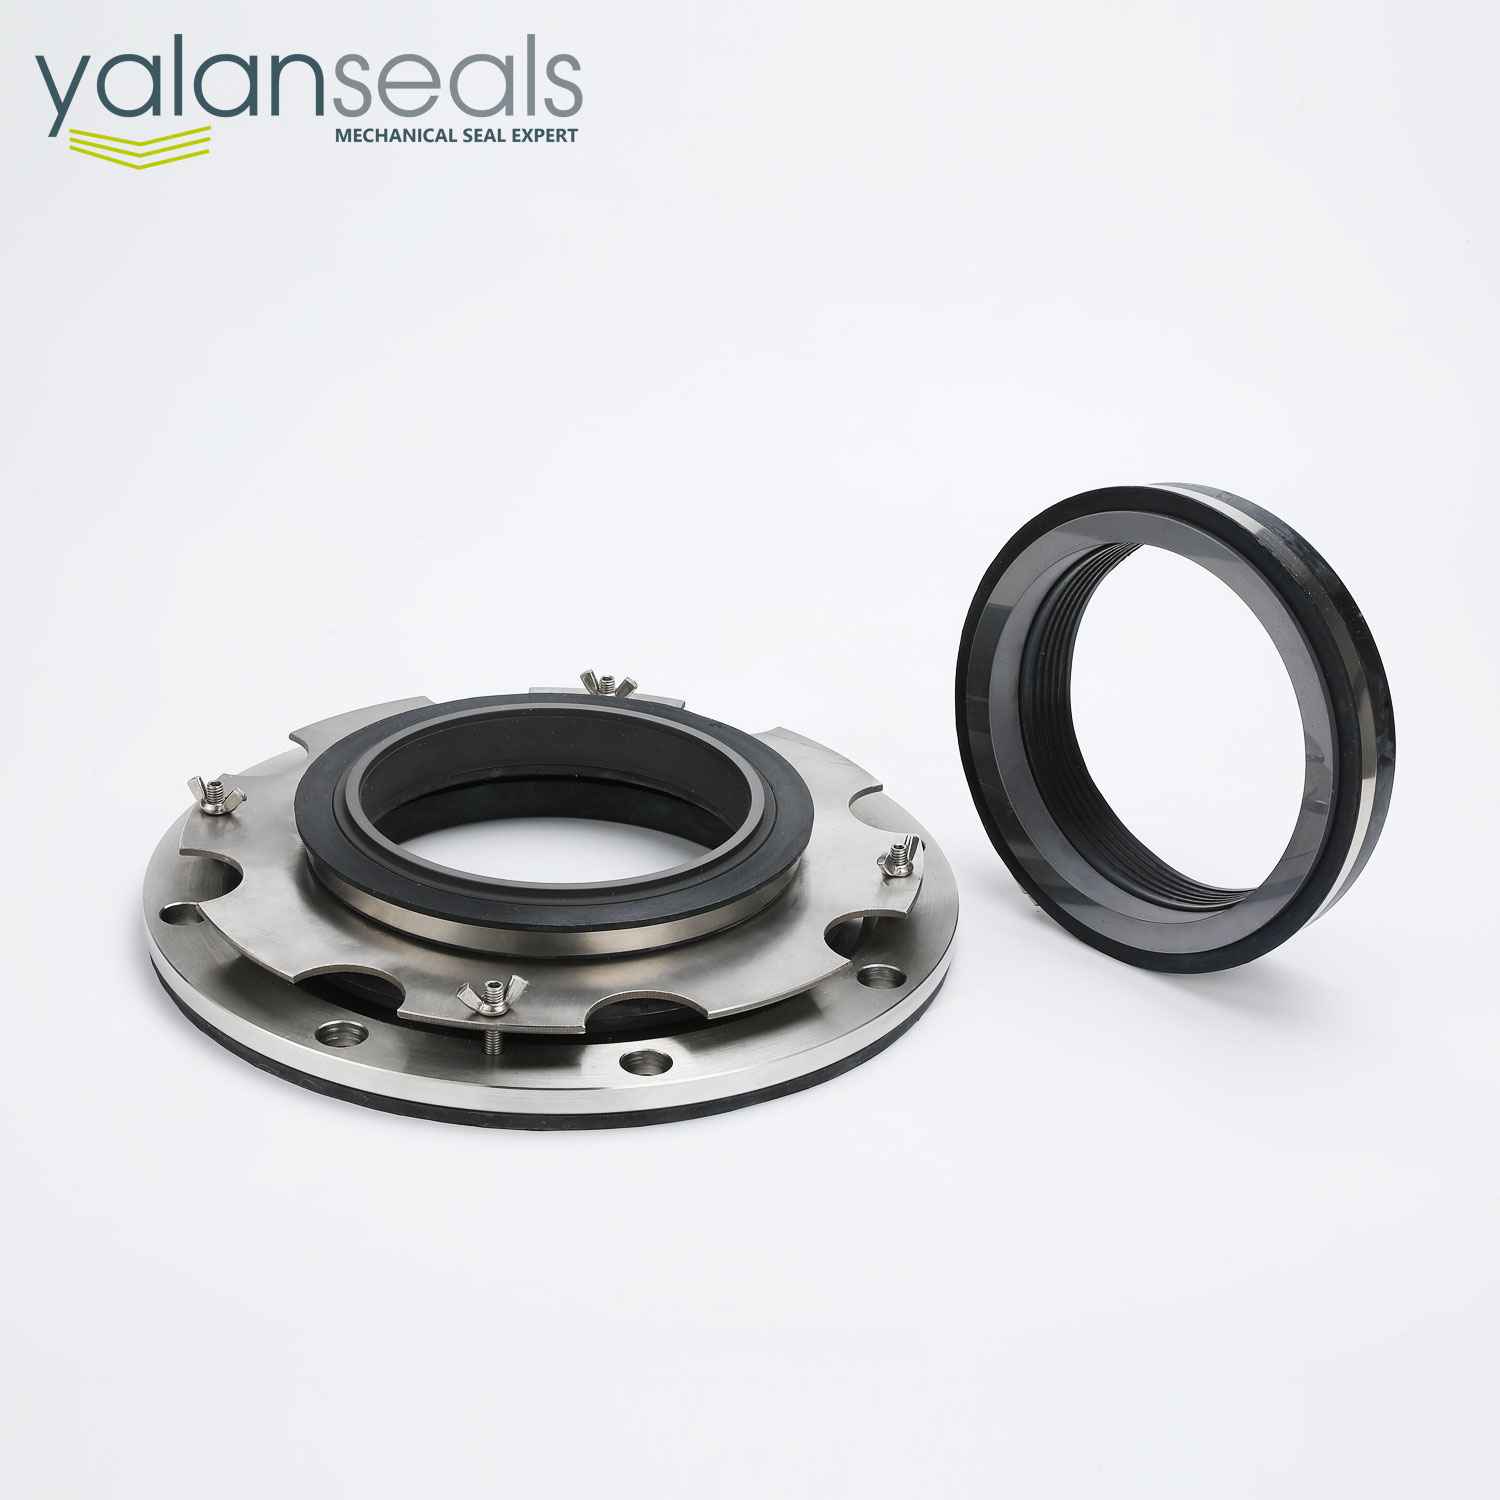 YLTRD-FL Mechanical Seal for Immersion Rollers